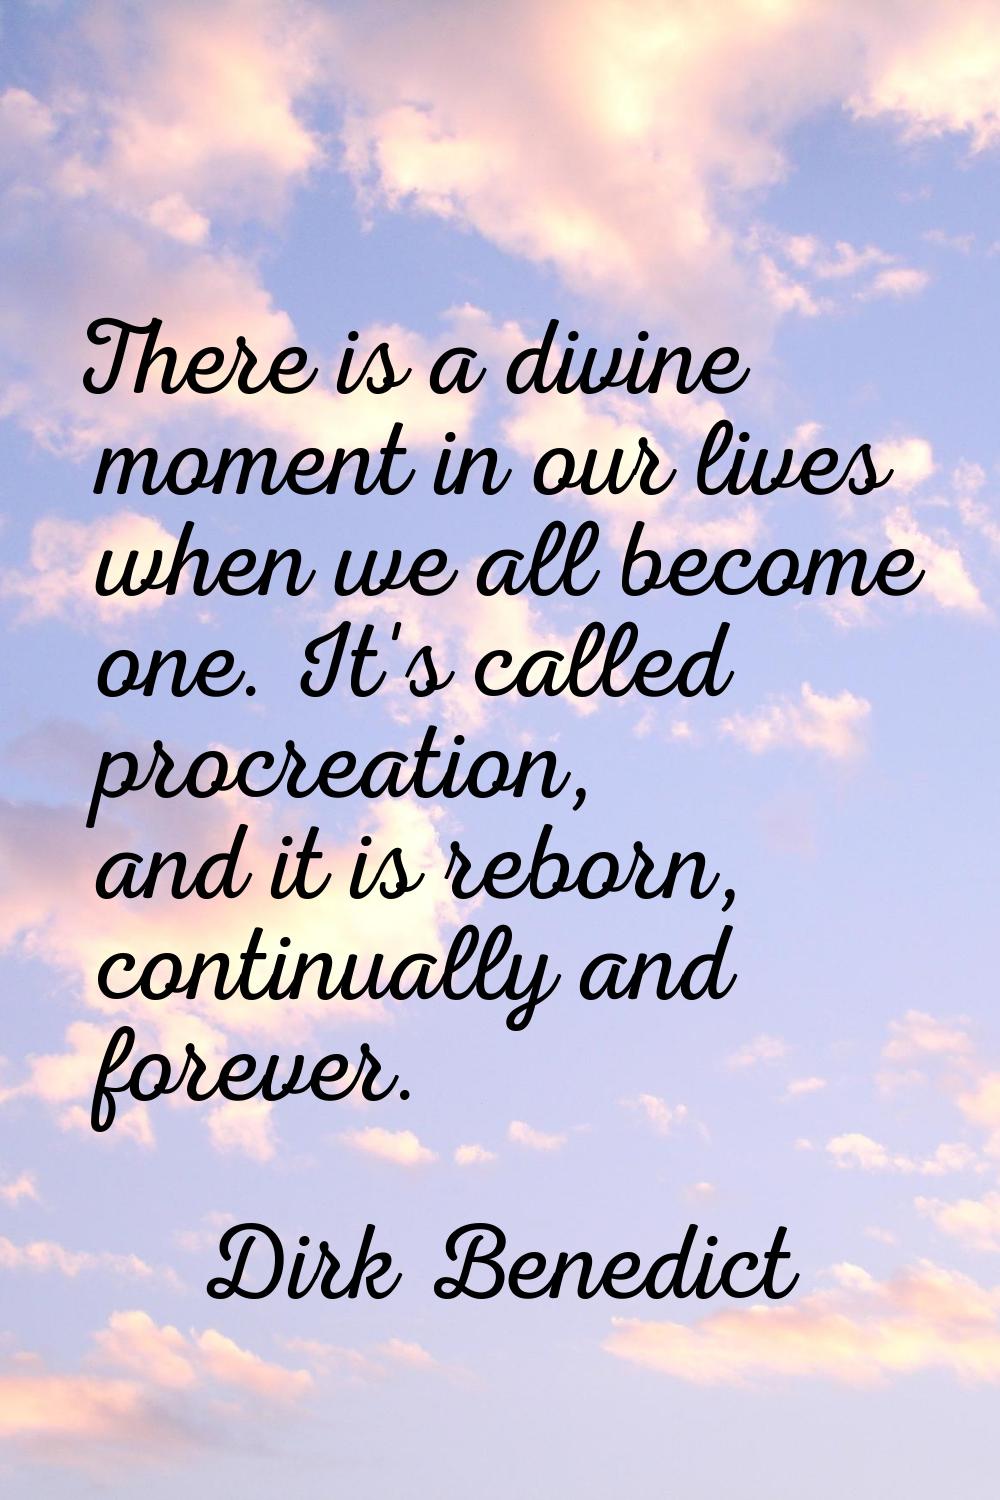 There is a divine moment in our lives when we all become one. It's called procreation, and it is re